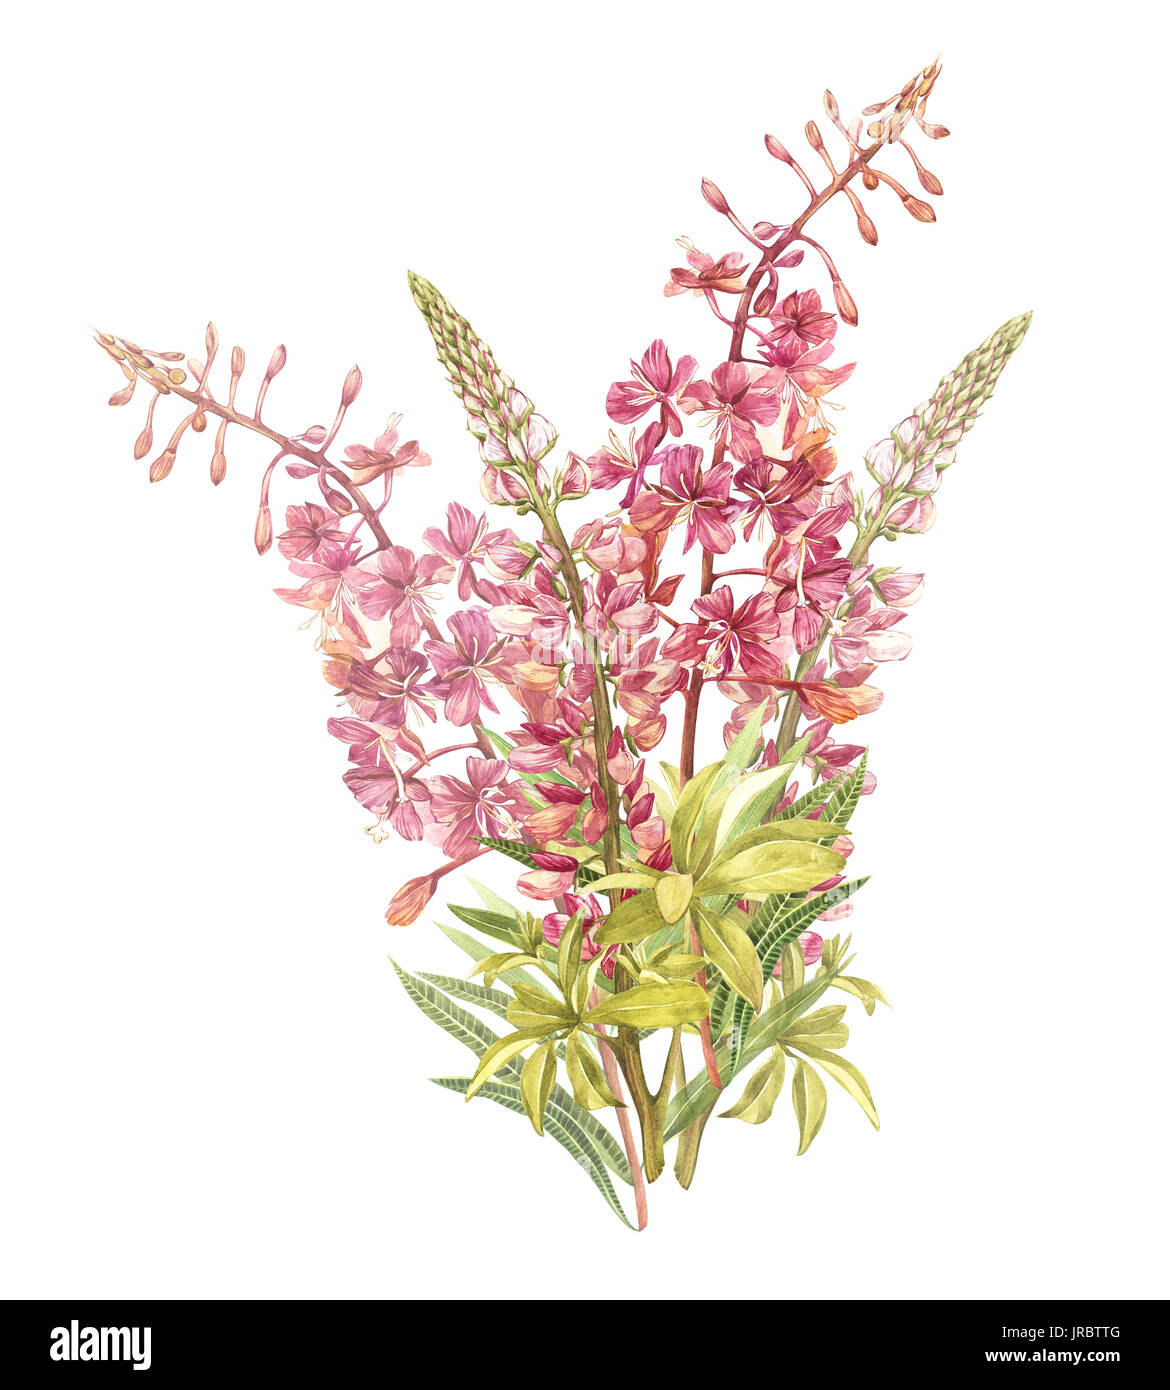 Spring flowers Willow-nerb and Lupine tree isolated on white background. Watercolor hand drawn illustration Stock Photo